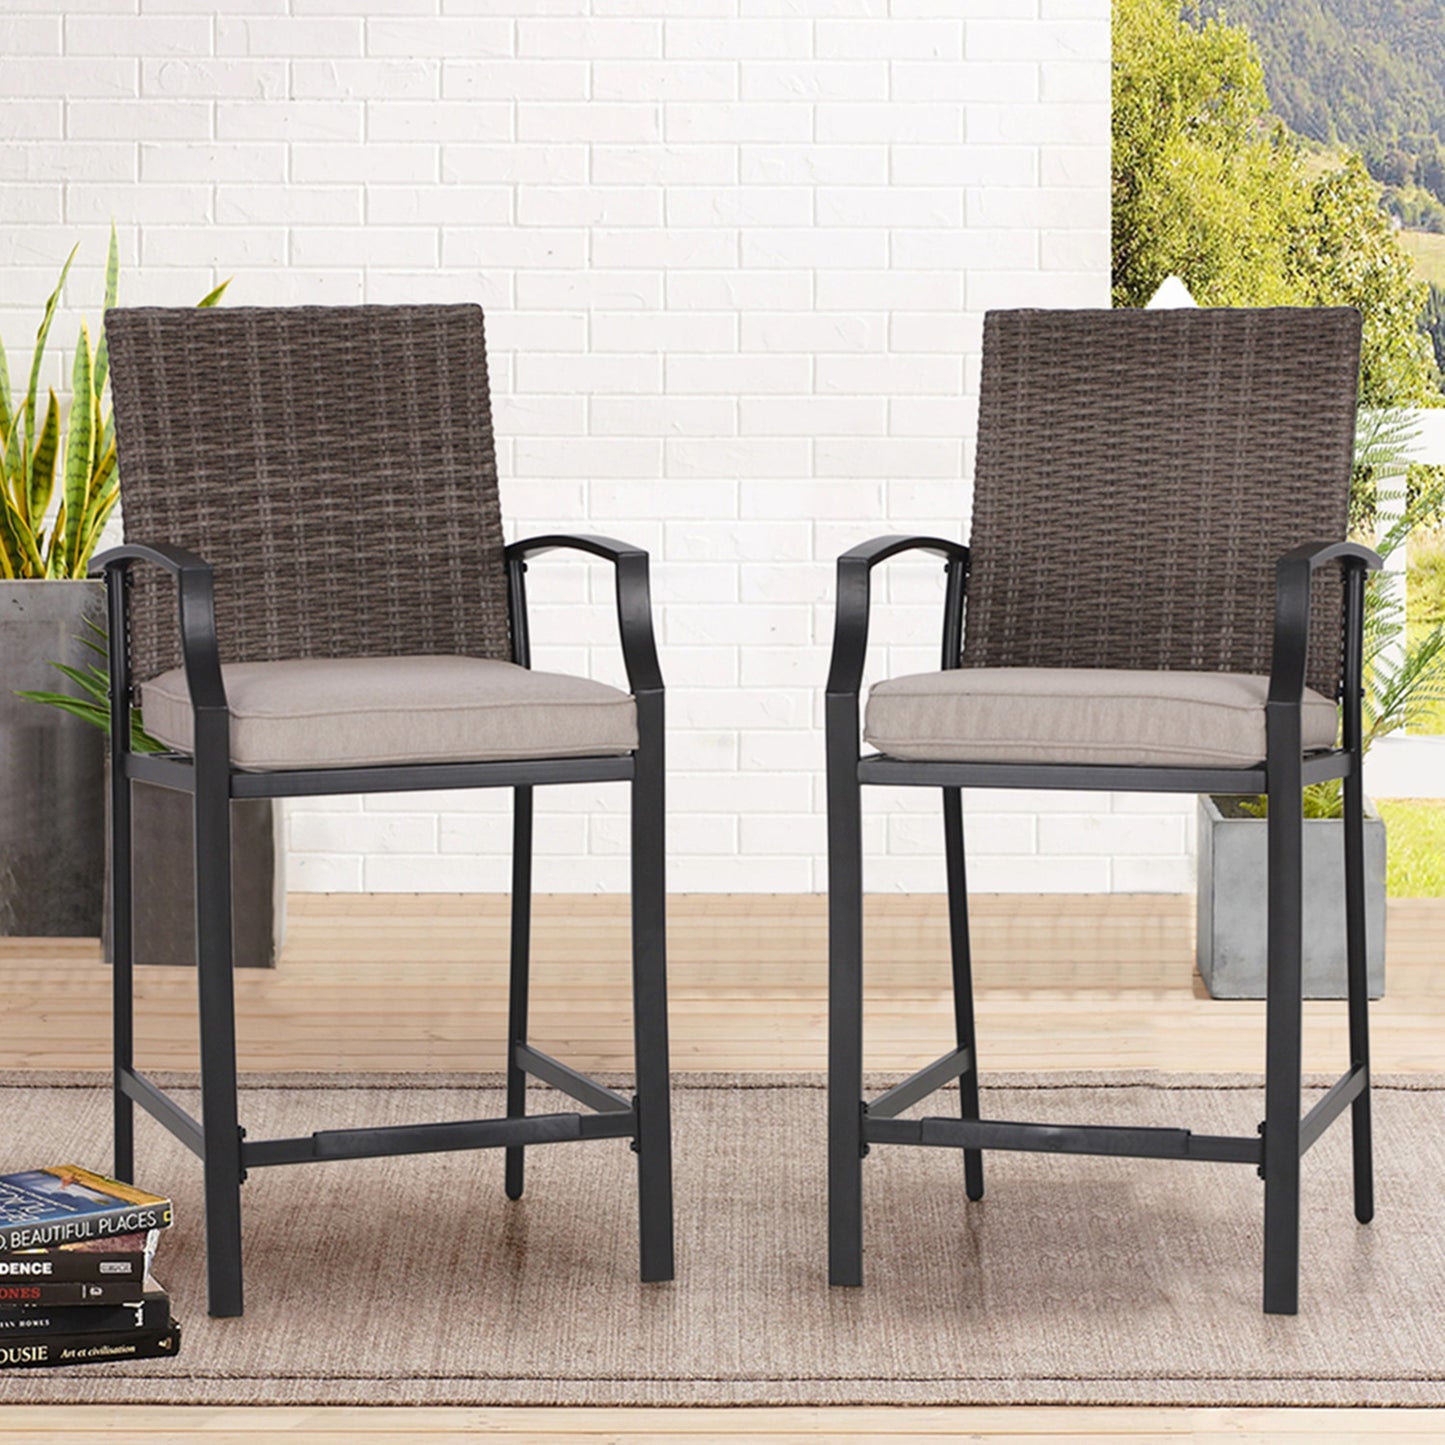 Sophia & William Patio Wicker Rattan Bar Stools Set of 2 with Cushions - Brown